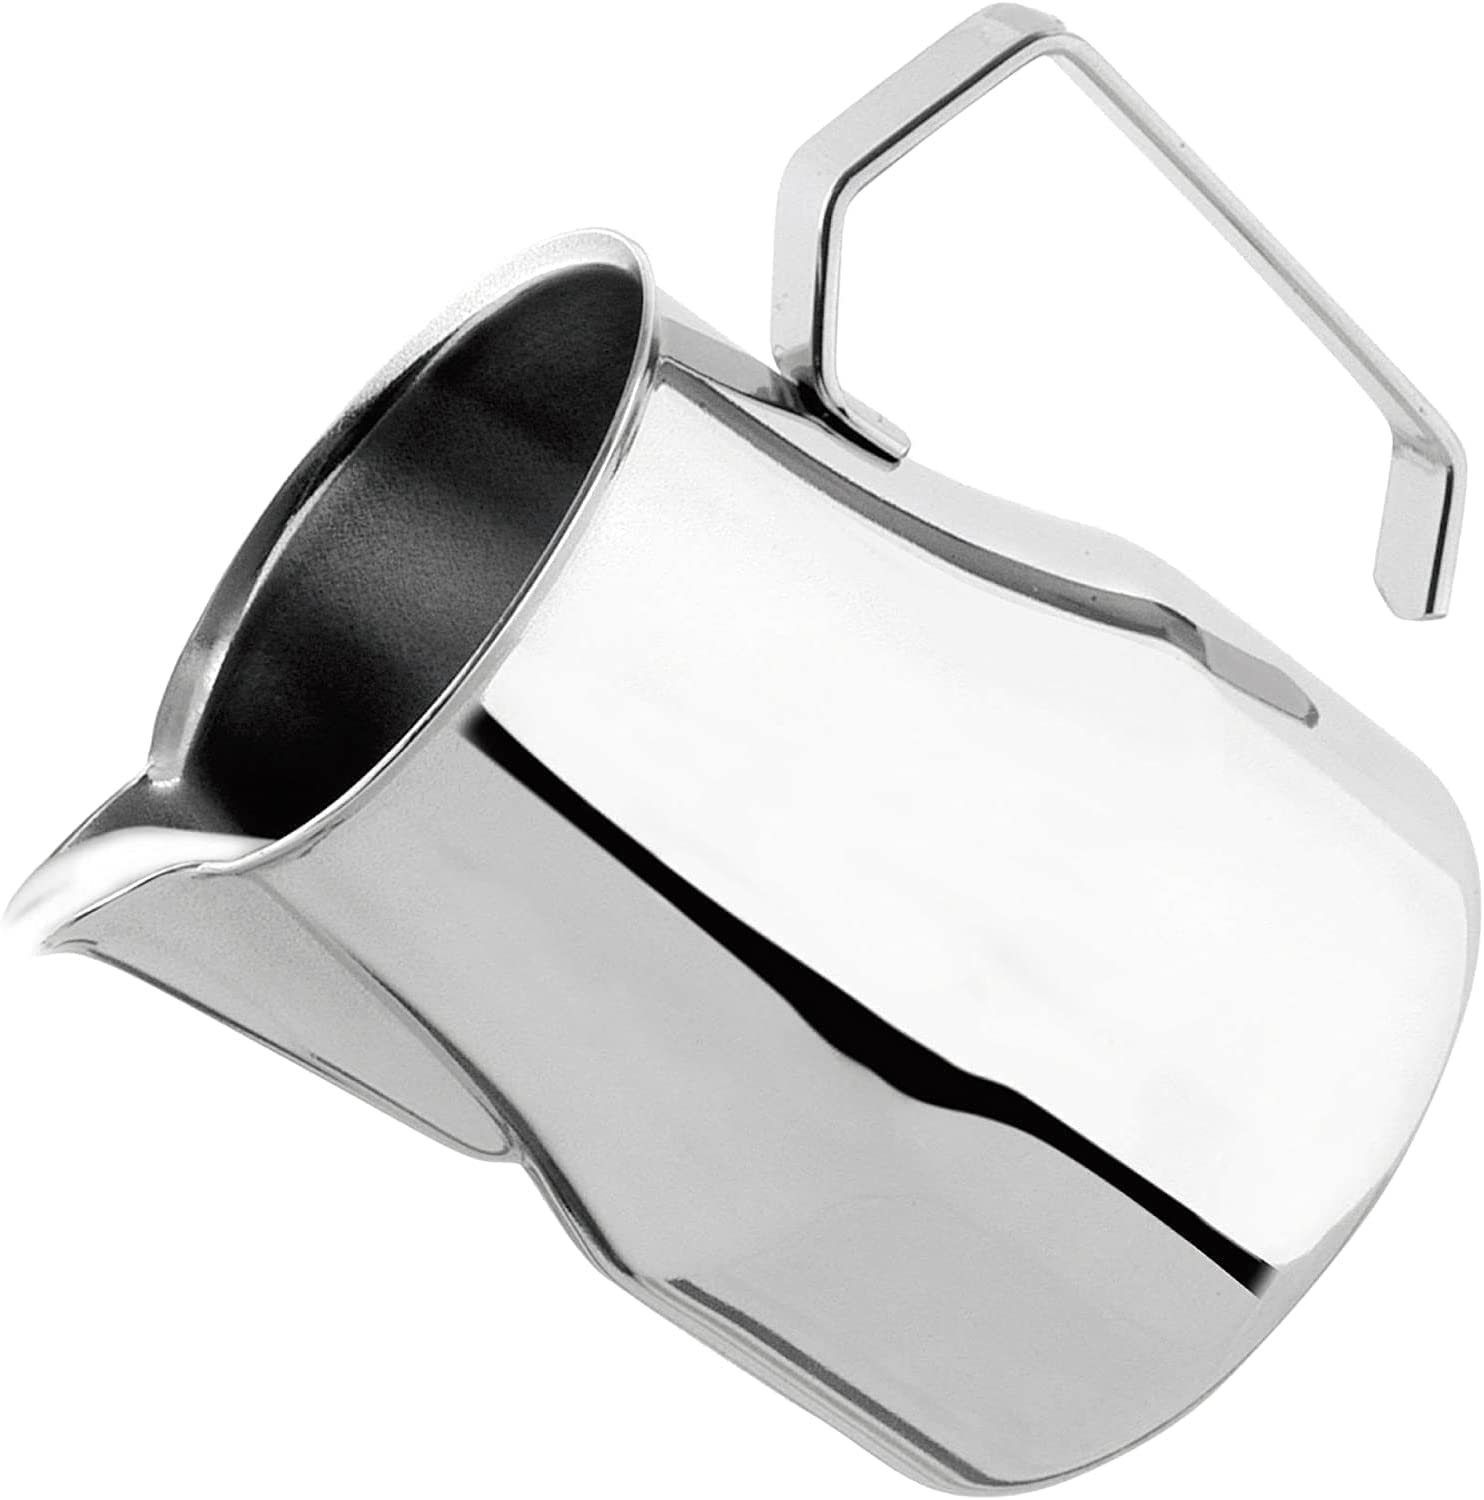 Stainless Steel Milk Jug Special Latte Capuccino Art Spout - Made In Italy By Motta (500 ML)